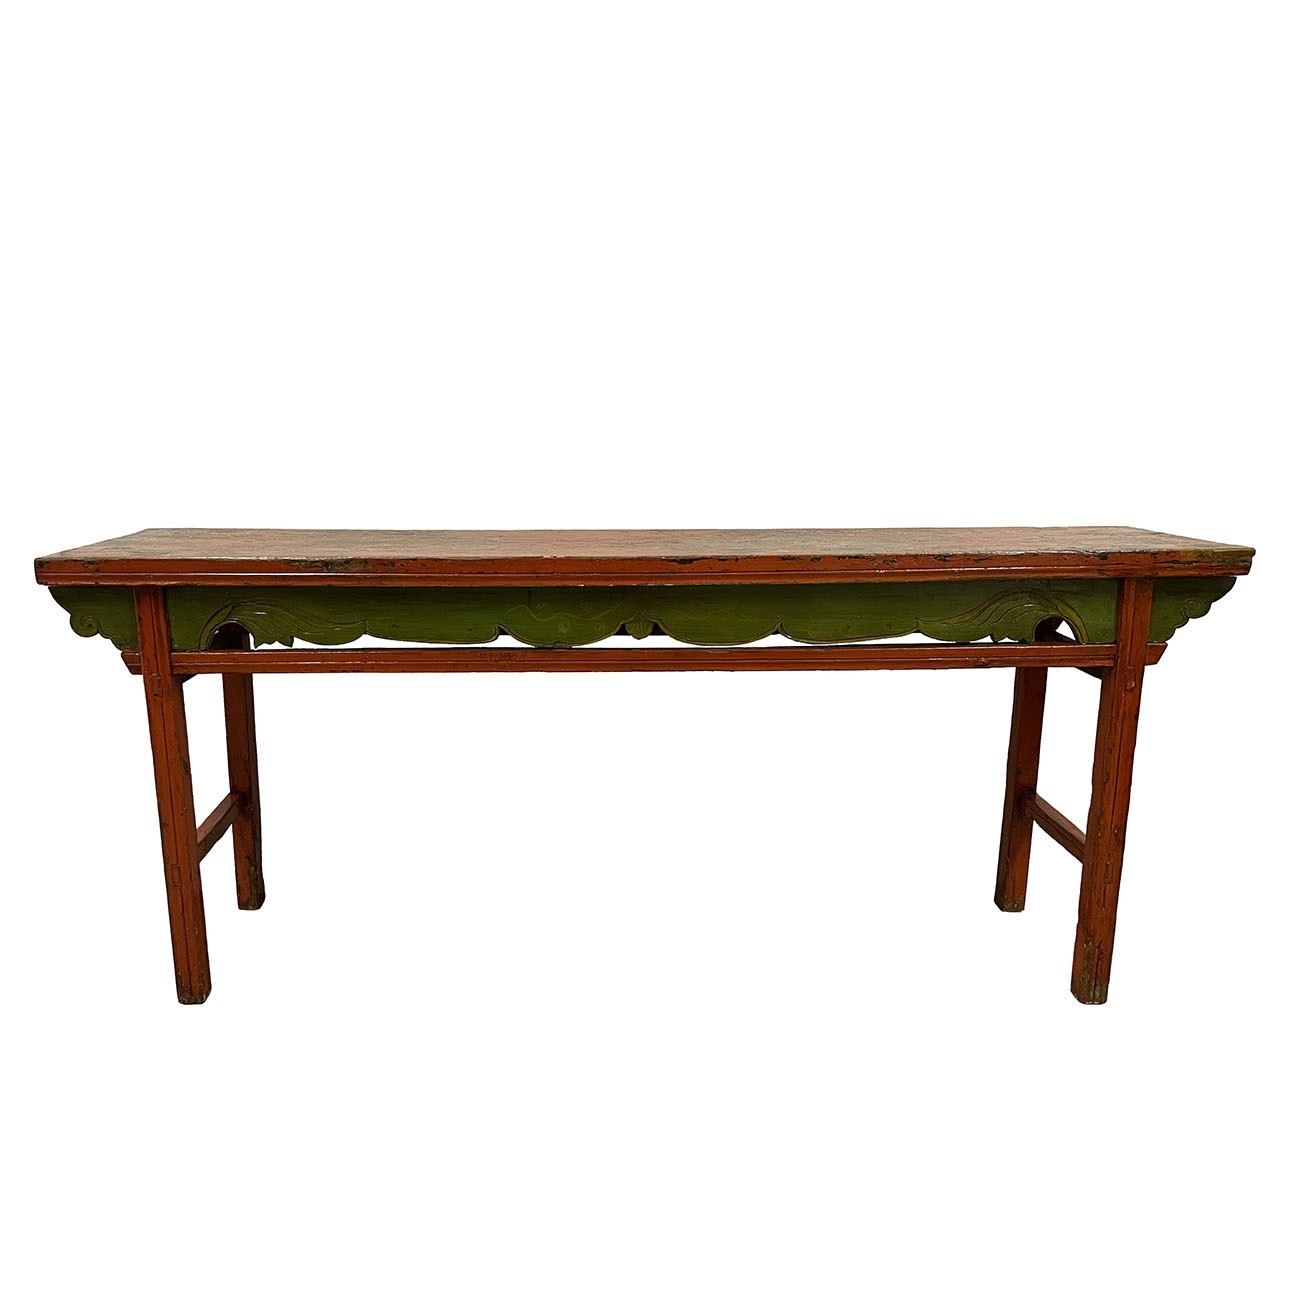 20th Century Antique Chinese Painted Long Sofa Table/Console Table